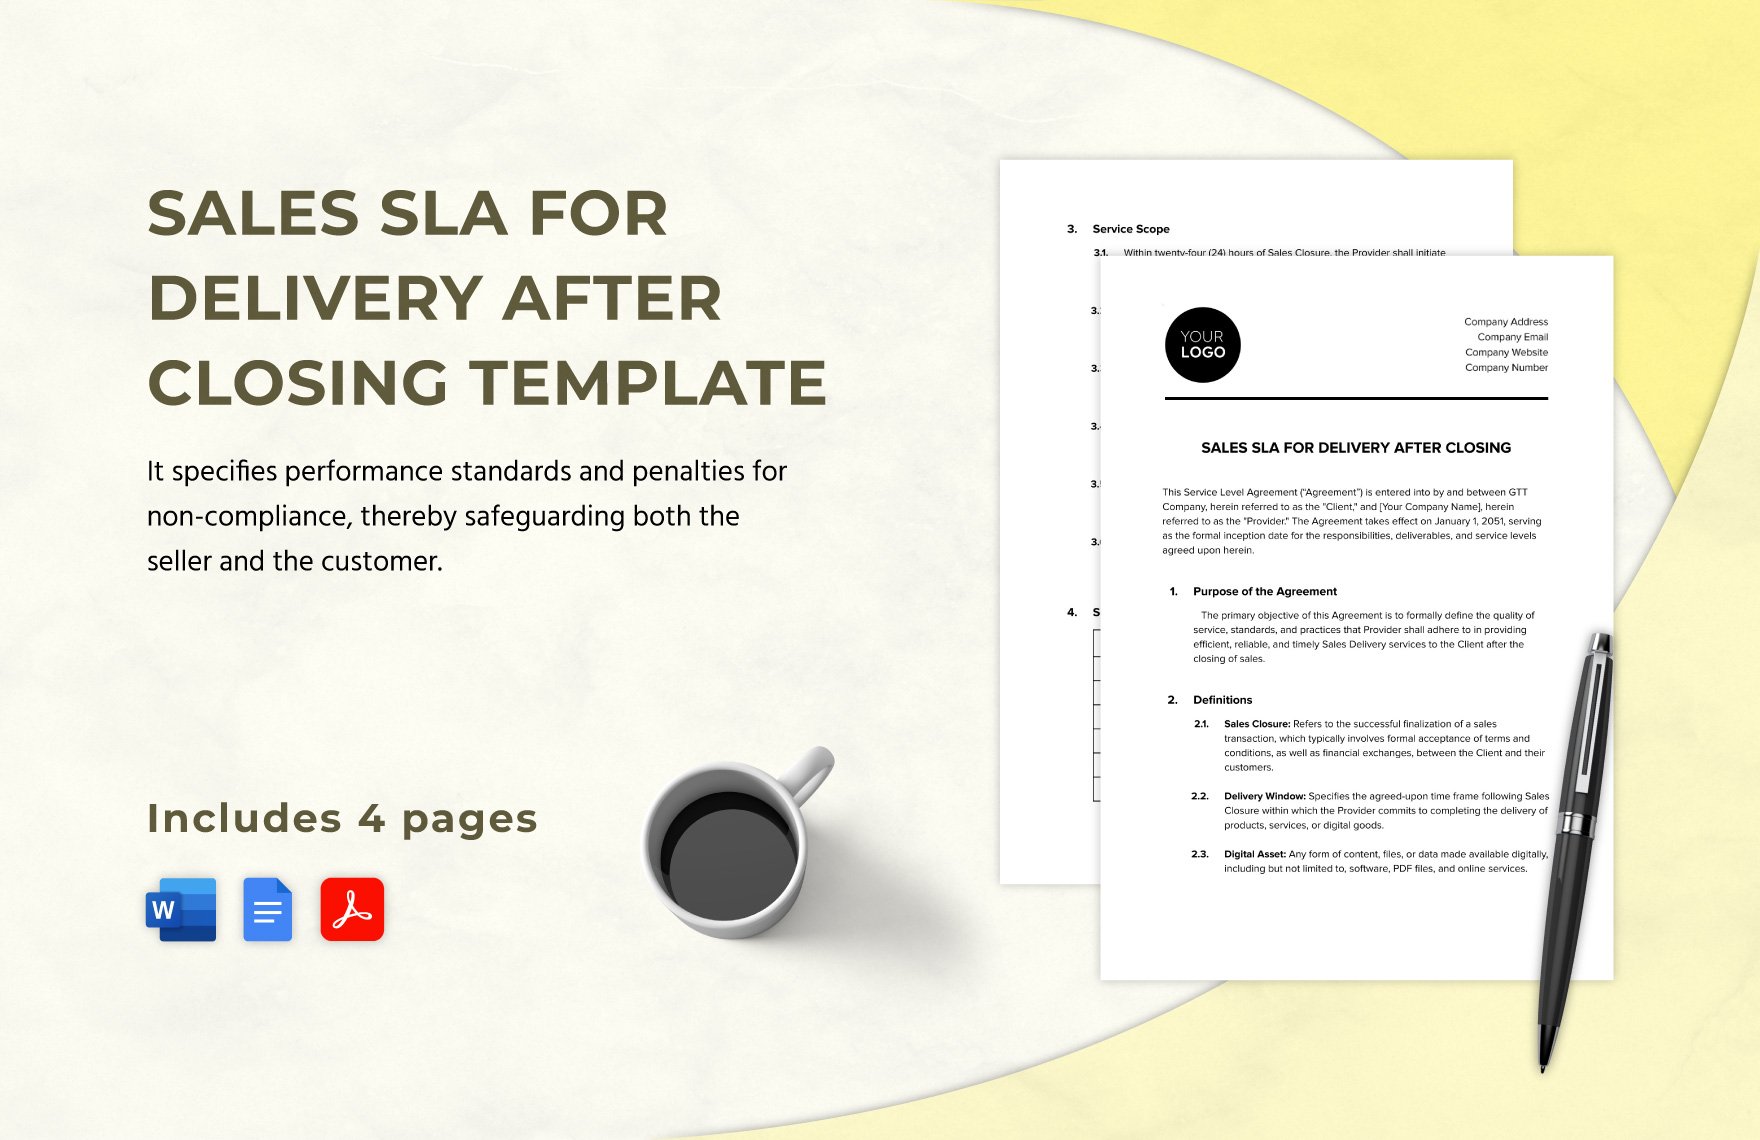 Sales SLA for Delivery after Closing Template